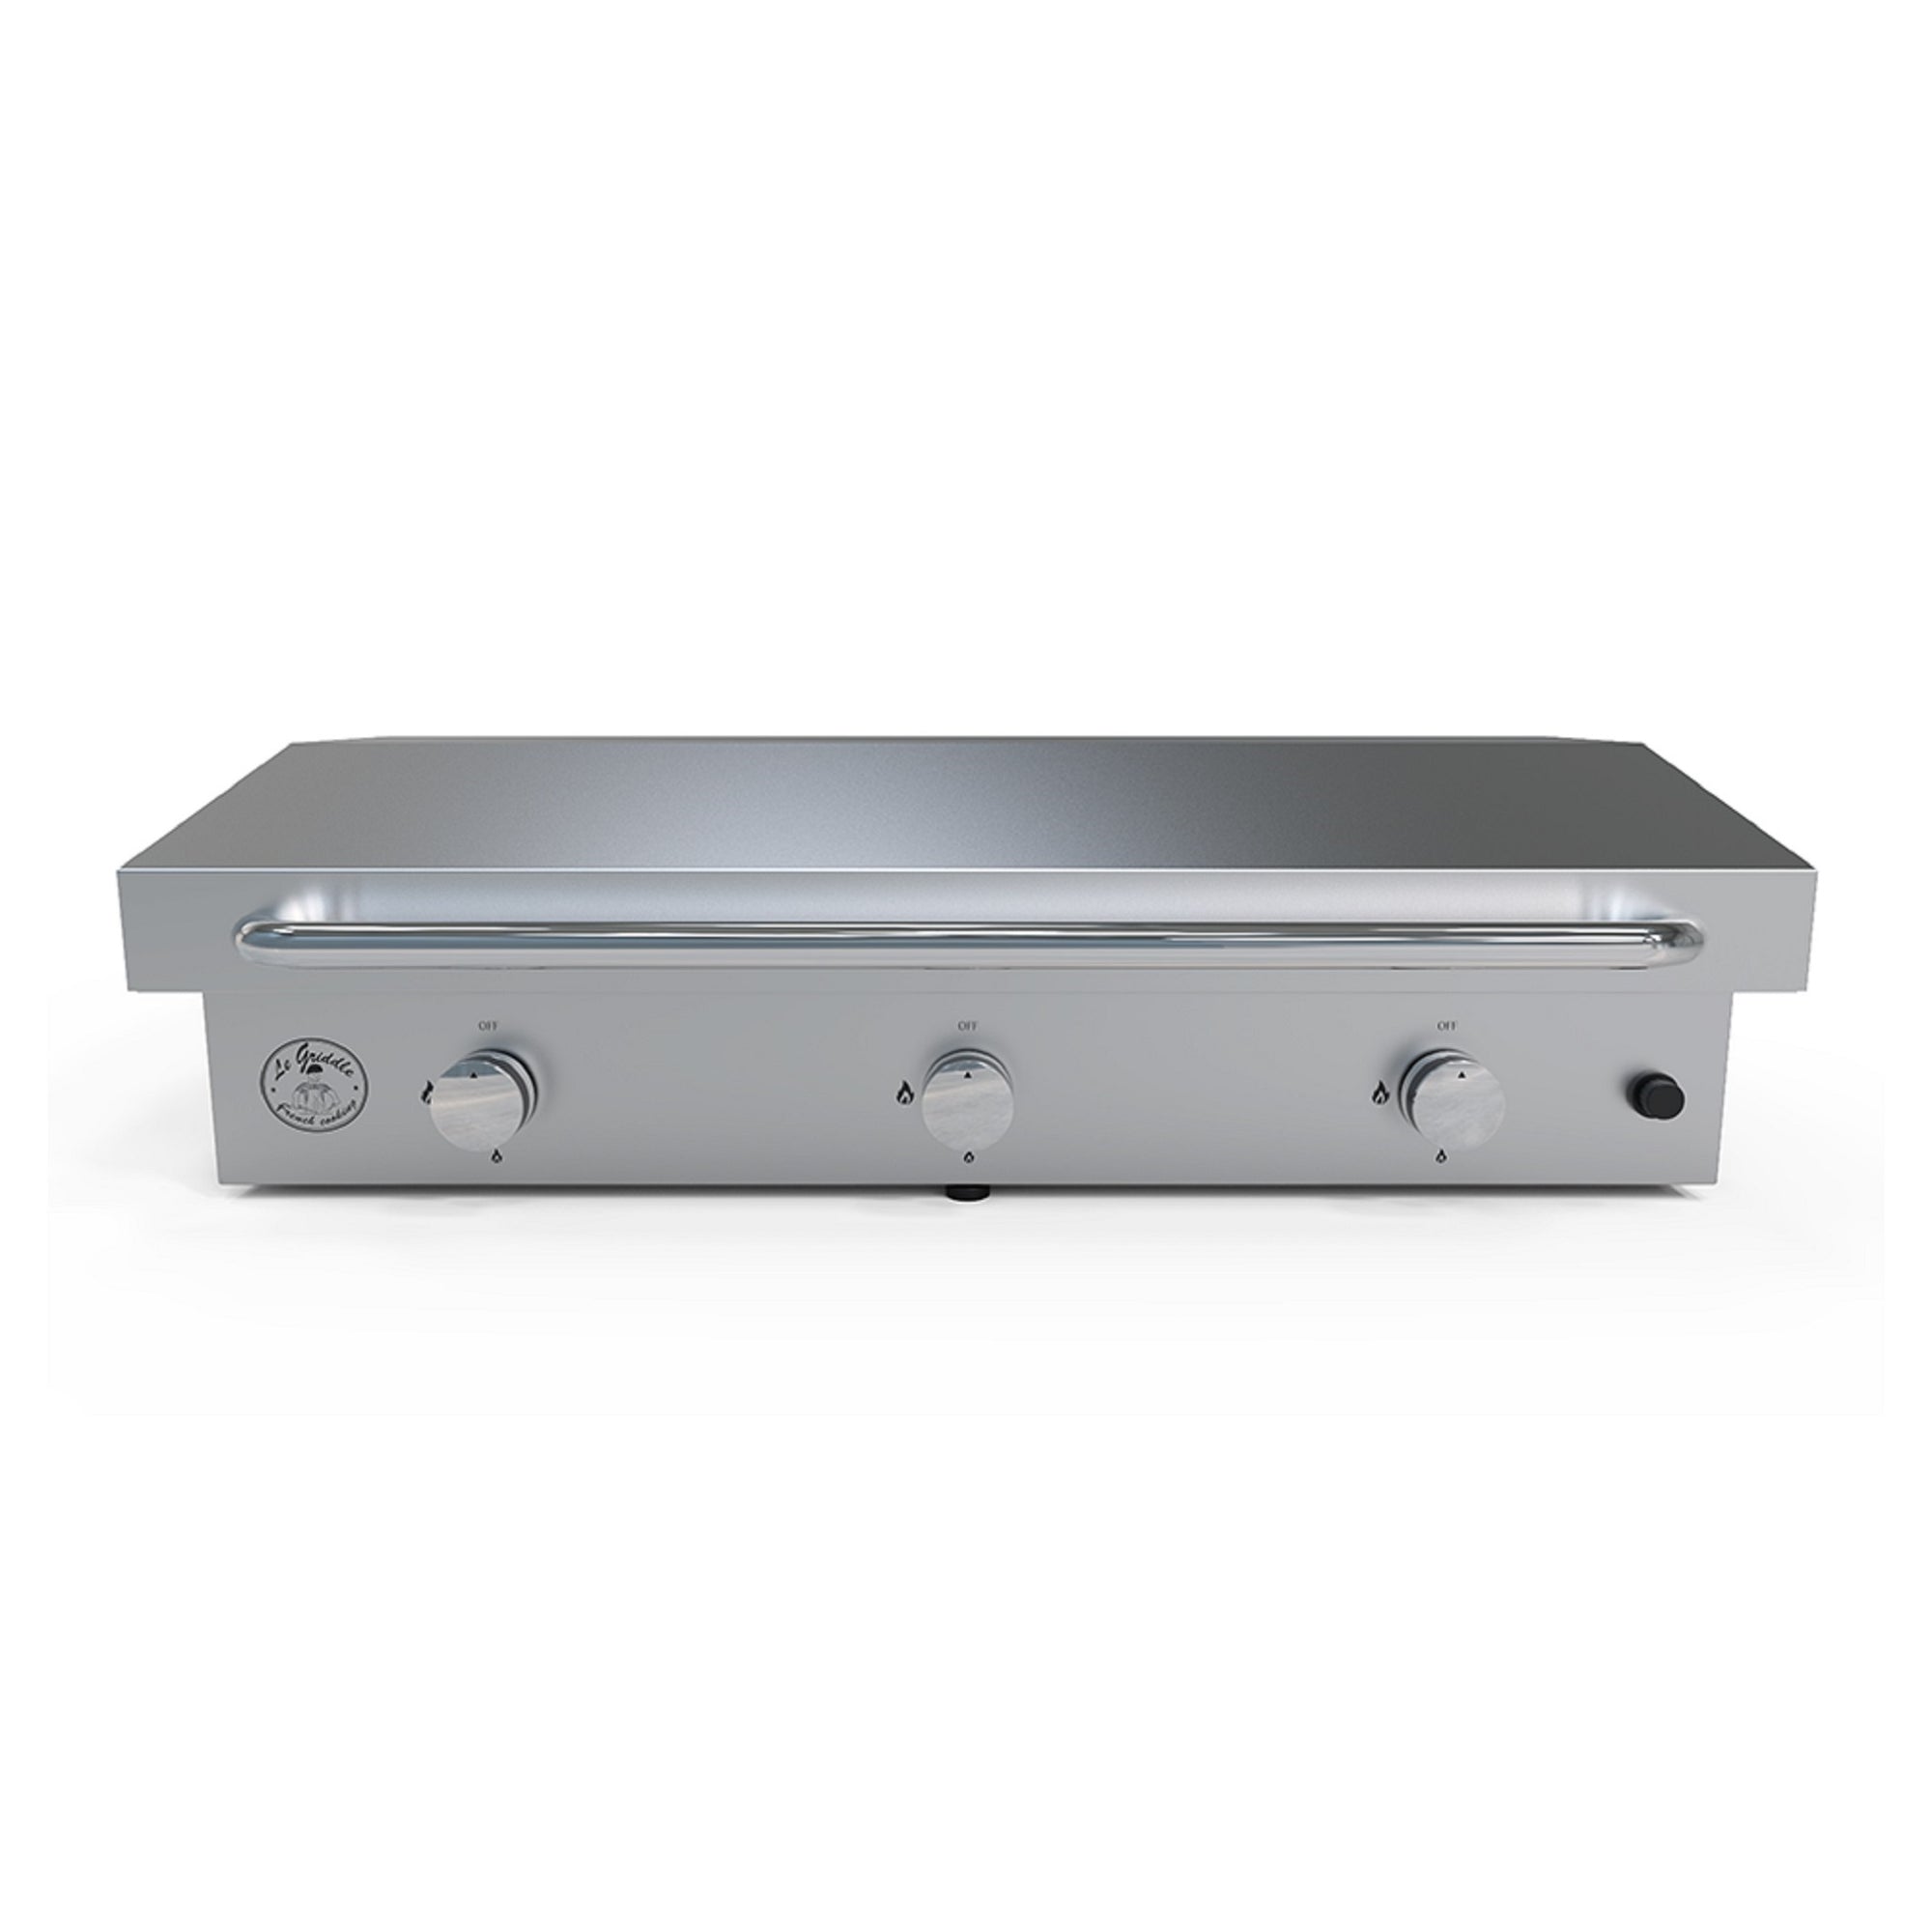 Le Griddle-3 Burner gas - 304 Stainless Steel Construction, Removable grease tray, stainless steel griddle with cast iron sub-plate, Patented griddle plate and safety valve with thermocouple in a white background - closed - front view